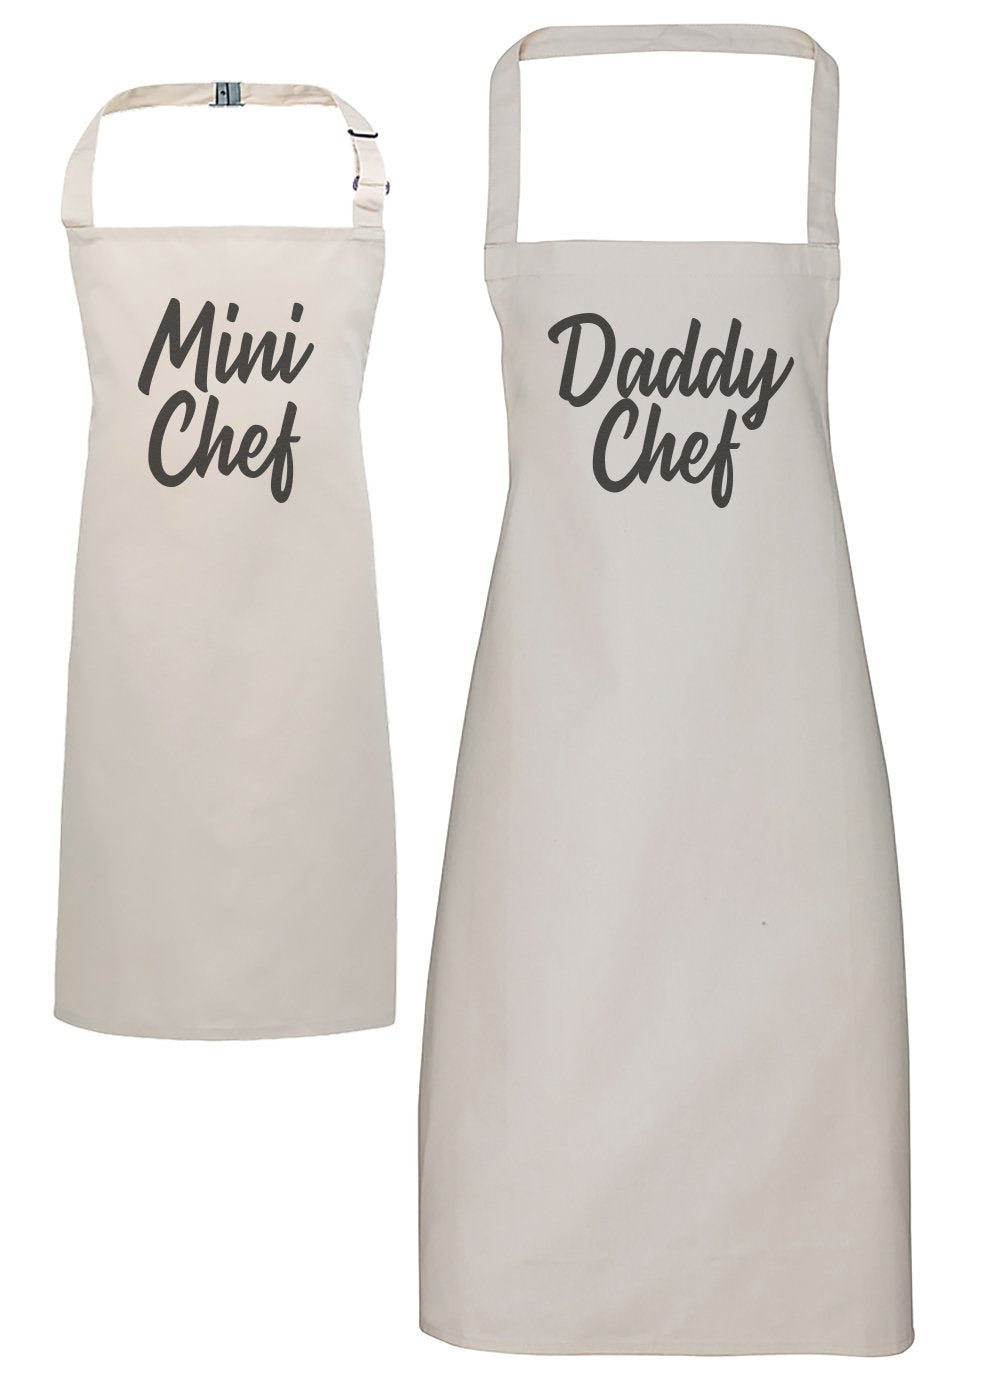 Daddy Chef & Mini Chef - Mens & Kids Aprons - (Sold Separately)